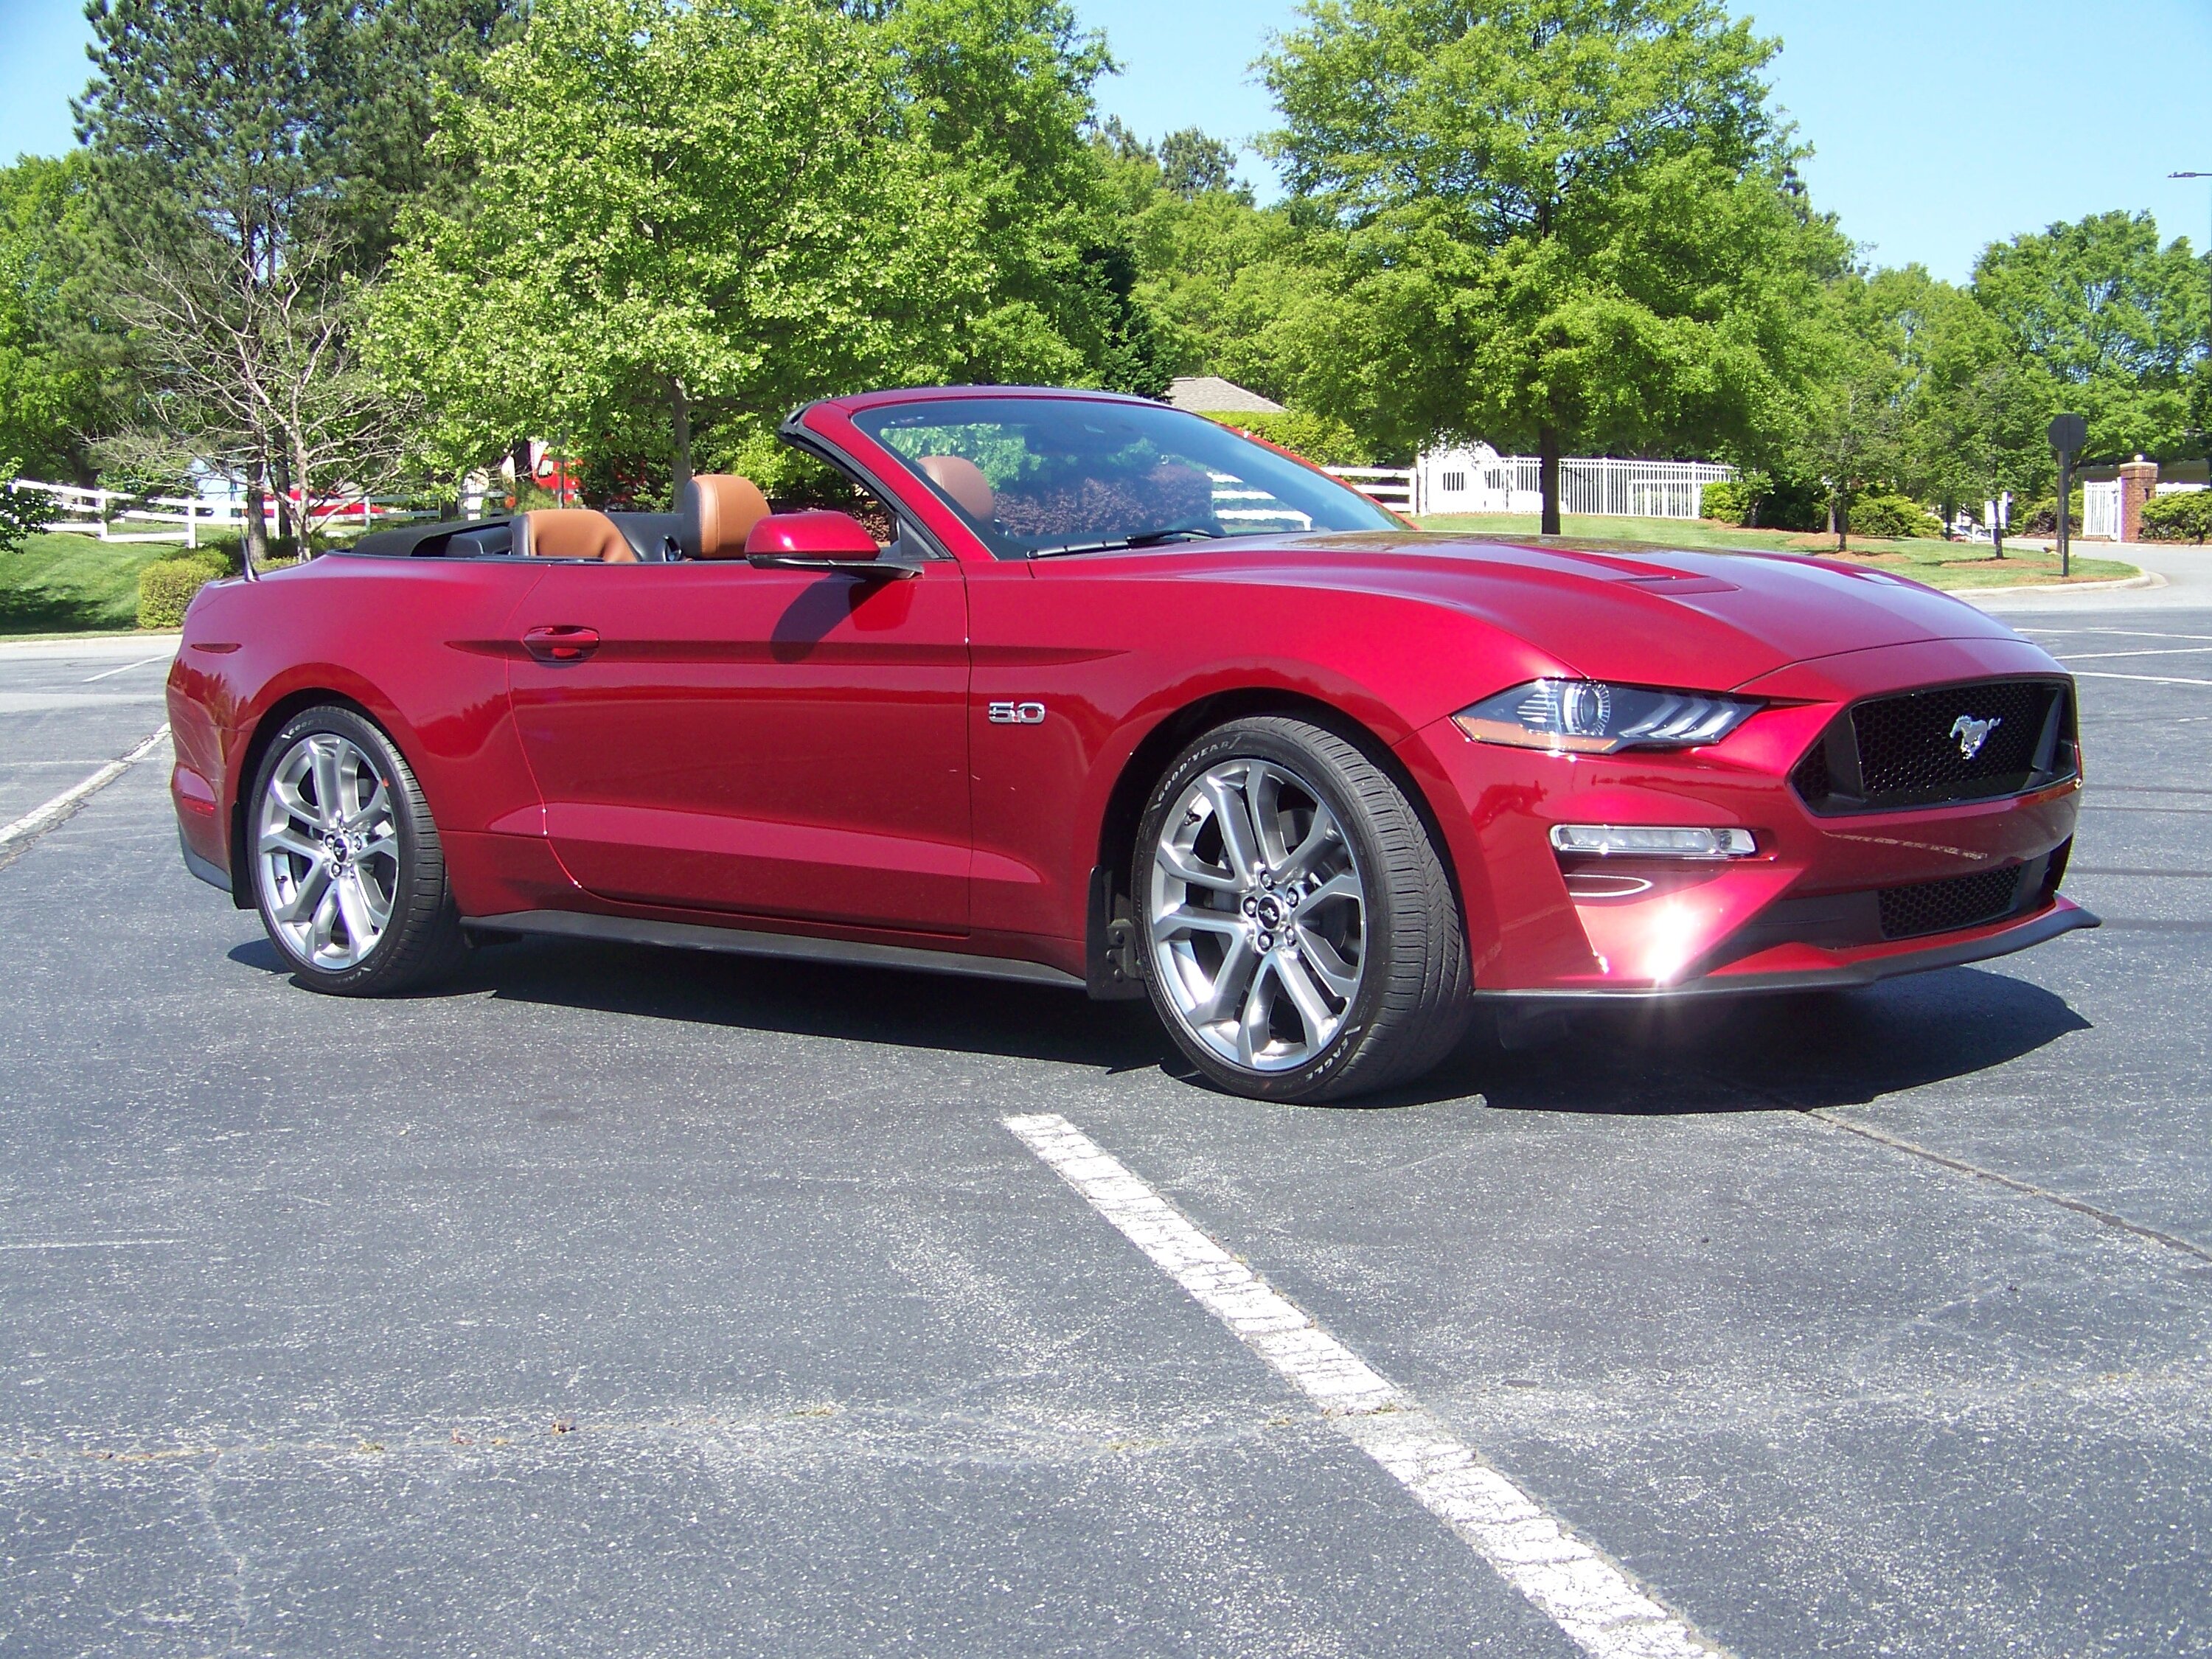 S650 Mustang Official RAPID RED Mustang S650 Thread 100_4357.JPG